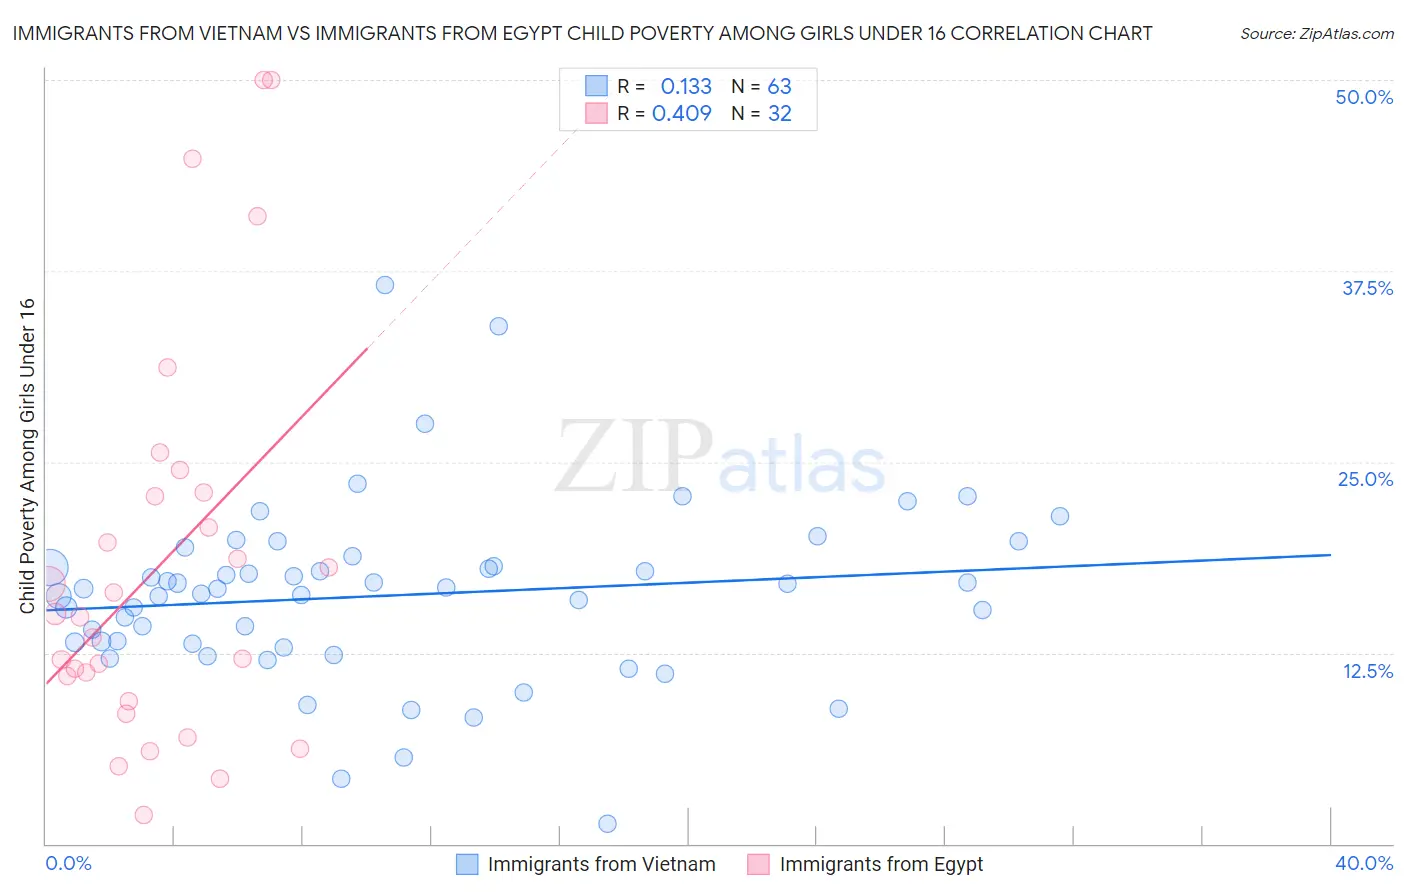 Immigrants from Vietnam vs Immigrants from Egypt Child Poverty Among Girls Under 16